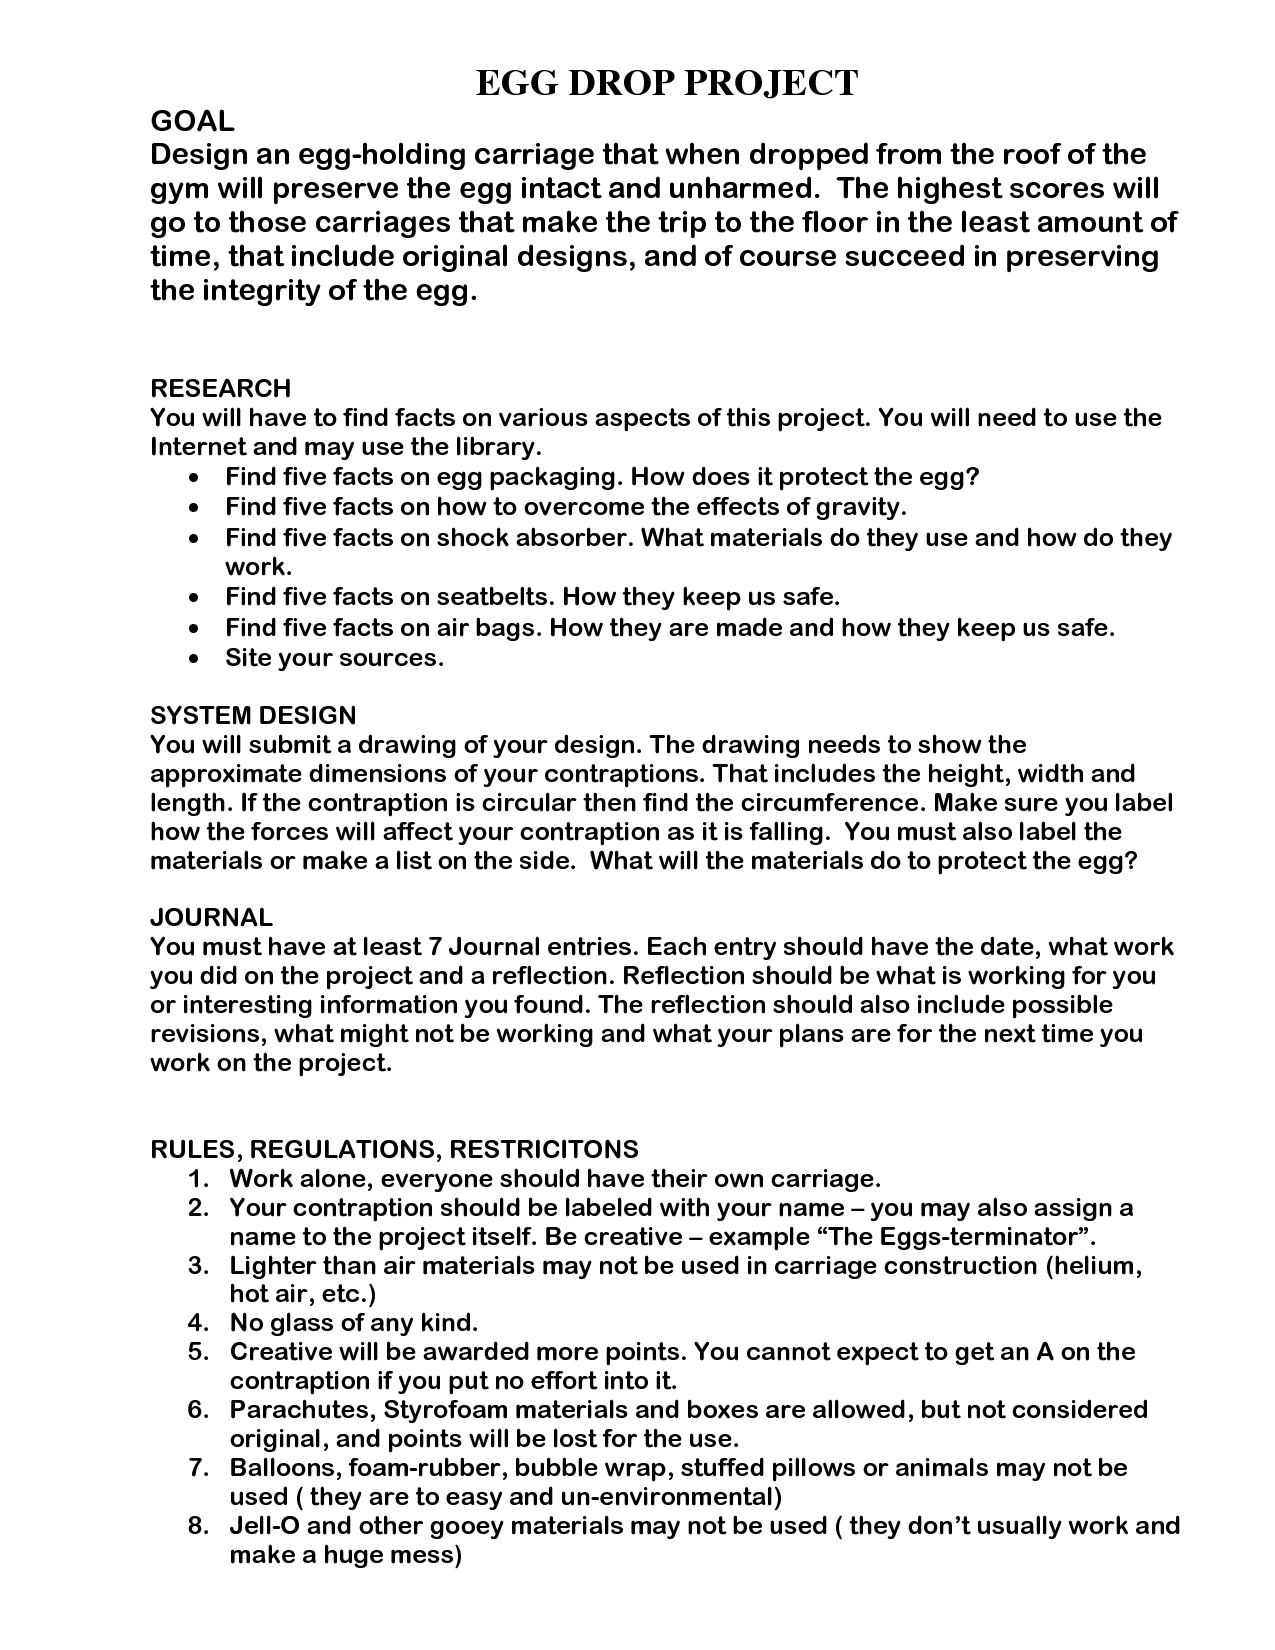 Egg Drop Project Doc (With Images) | Egg Drop Project, Egg